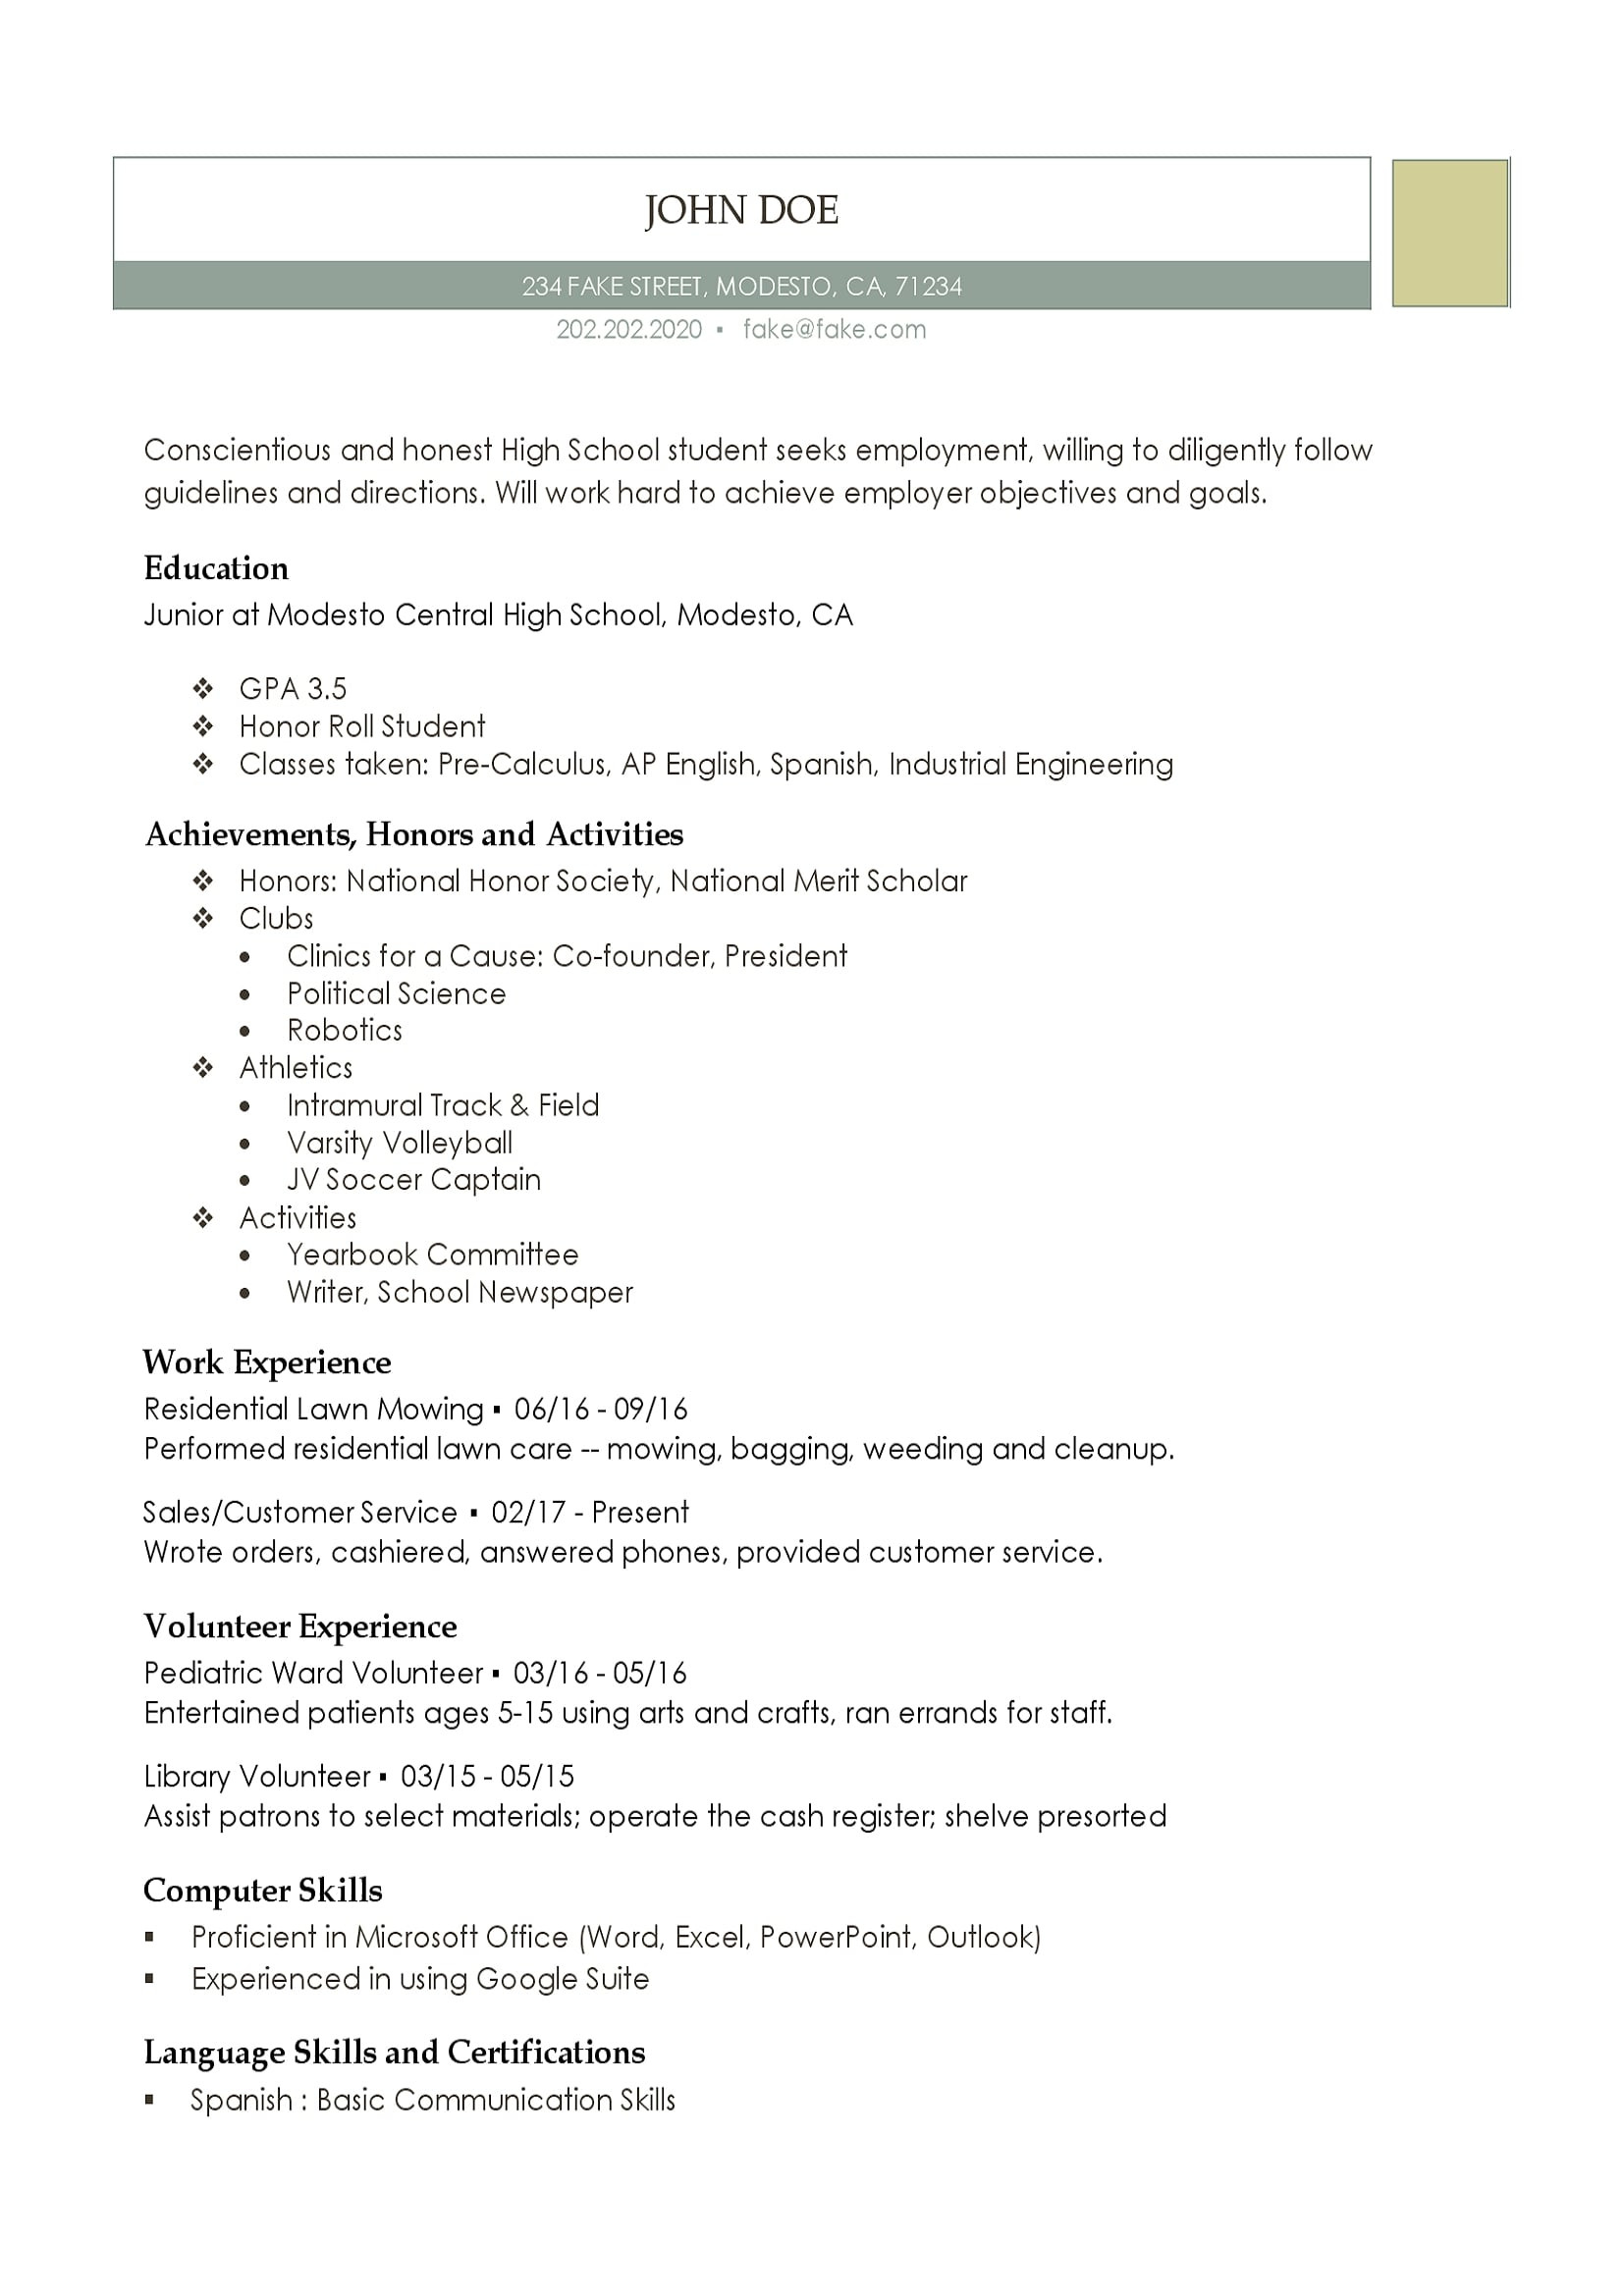 Resume Template for Middle School Students High School Resume – Resume Templates for High School Students and …